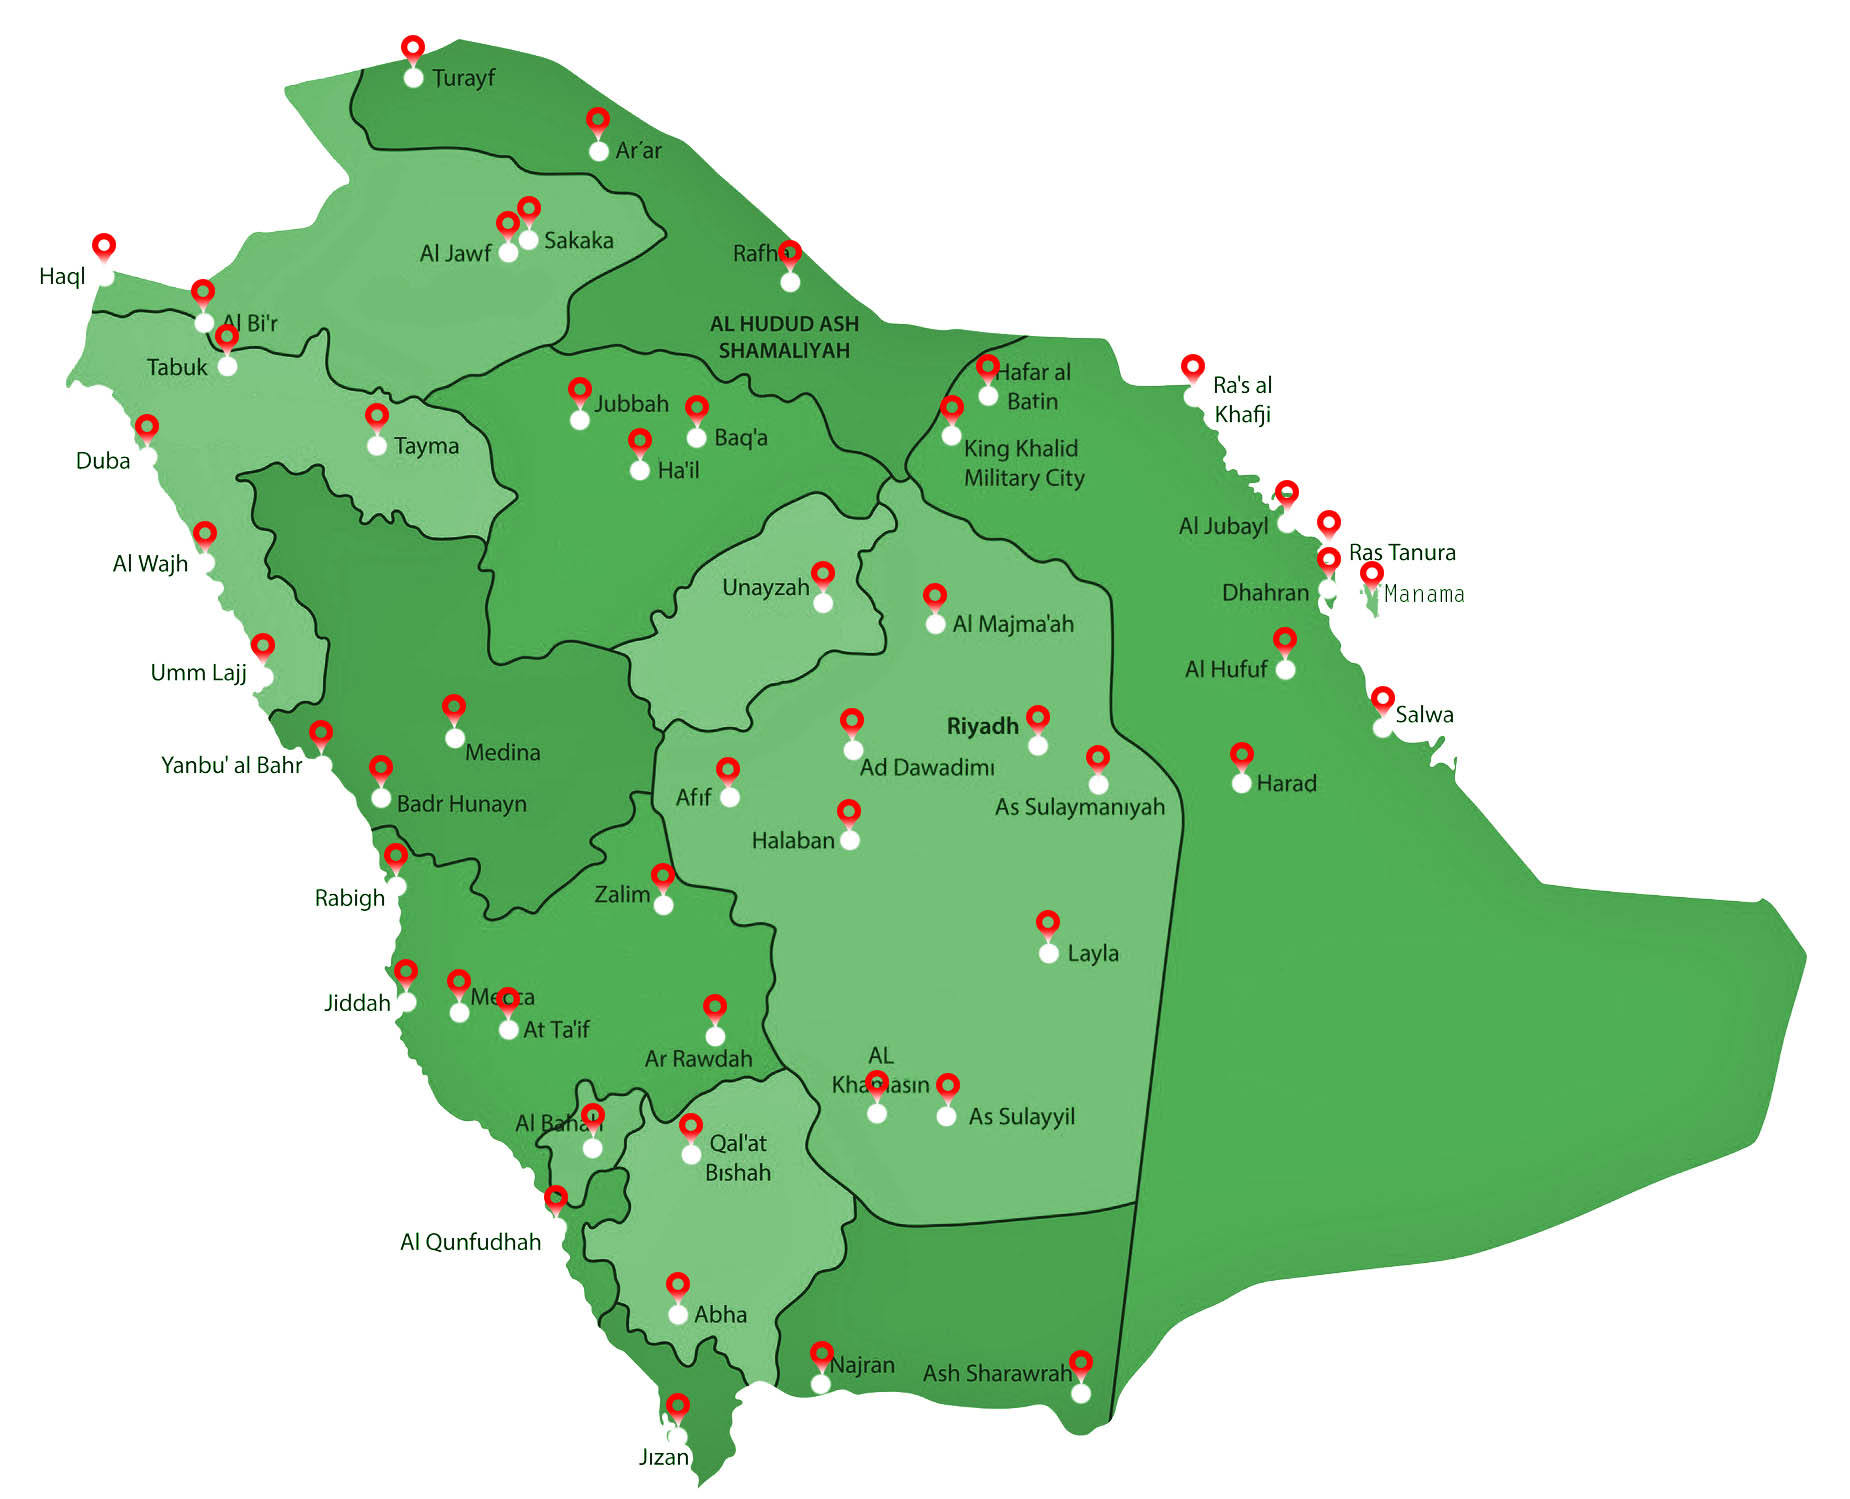 The detailed map of the Saudi Arabia with regions or states and cities, capitals